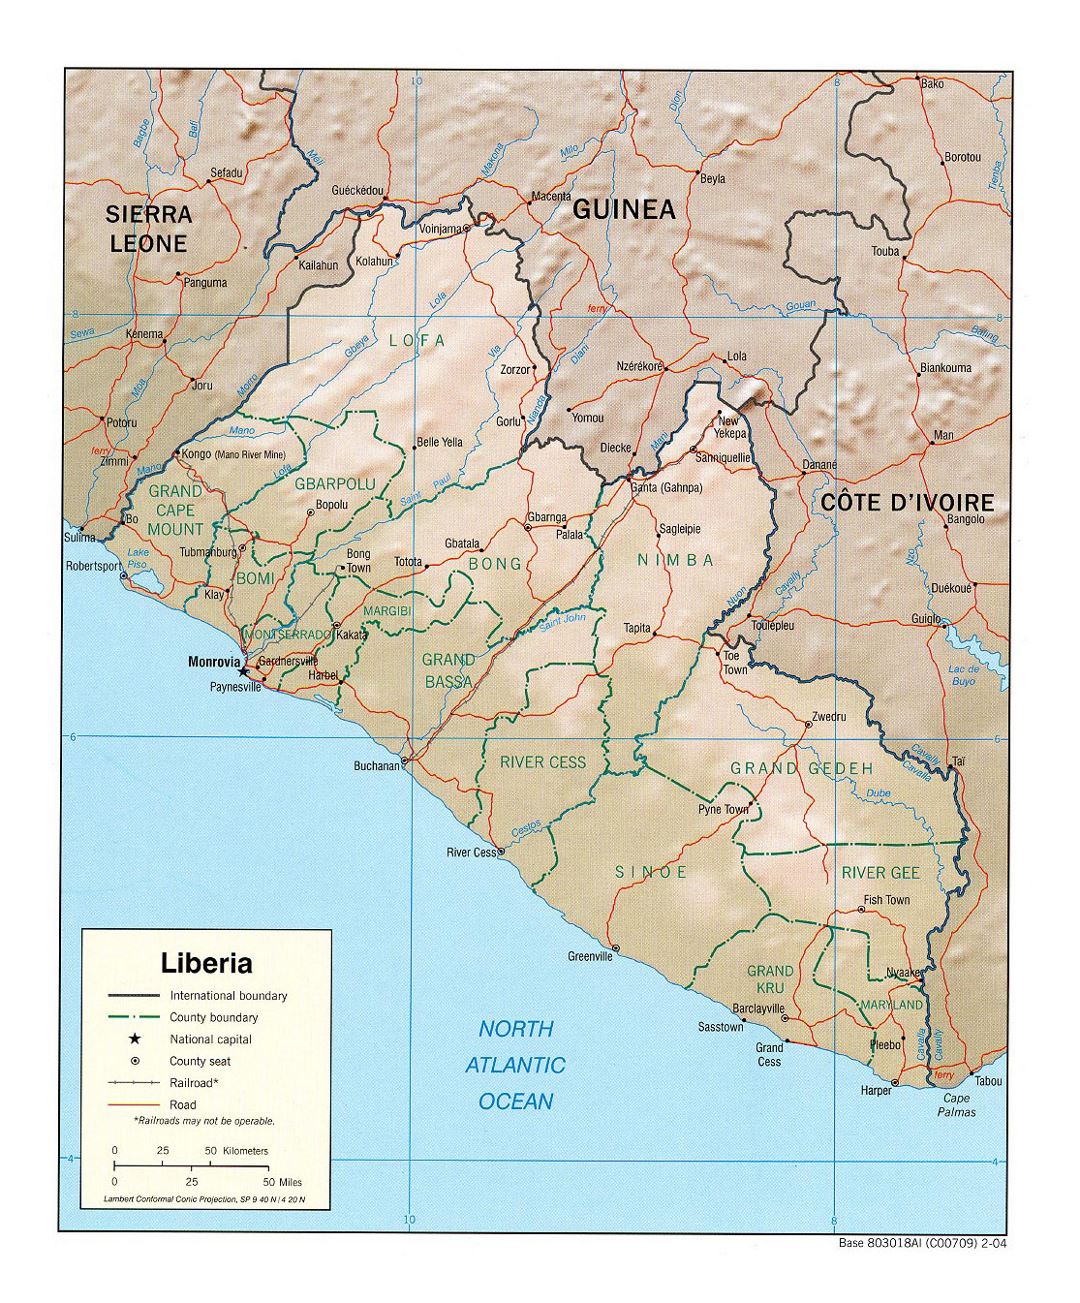 Detailed political and administrative map of Liberia with relief, roads, railroads and major cities - 2004